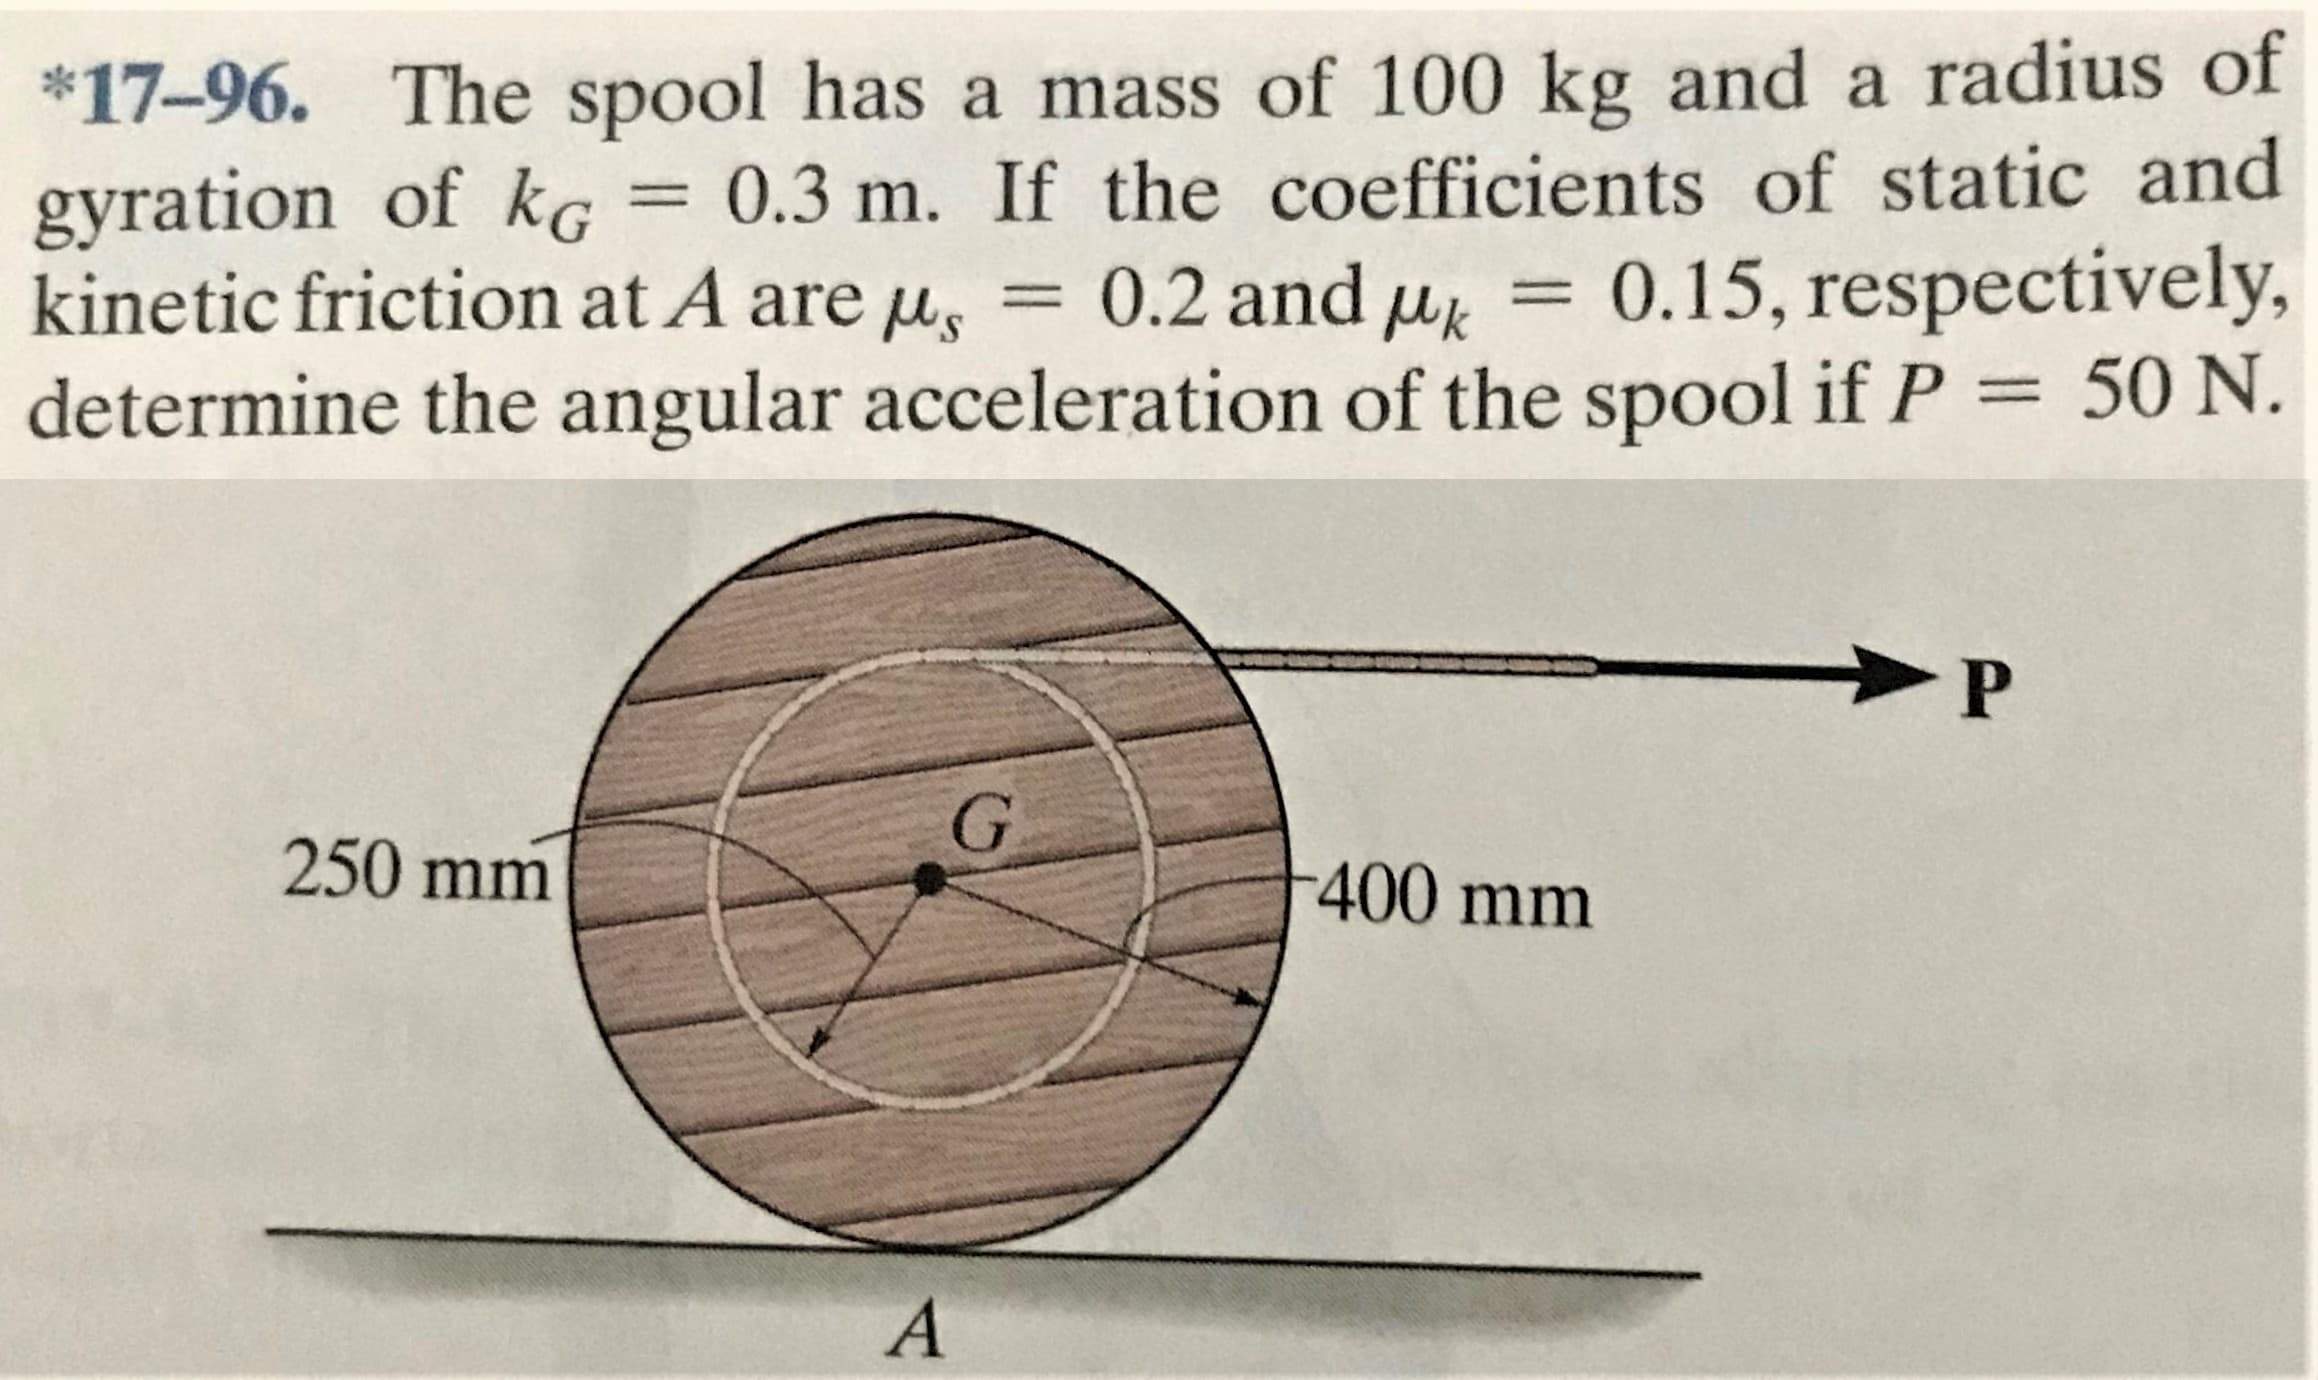 *17-96. The spool has a mass of 100 kg and a radius of
gyration of kG = 0.3 m. If the coefficients of static and
kinetic friction at A are u, = 0.2 and u = 0.15, respectively,
determine the angular acceleration of the spool if P = 50 N.
250 mm
-400 mm
